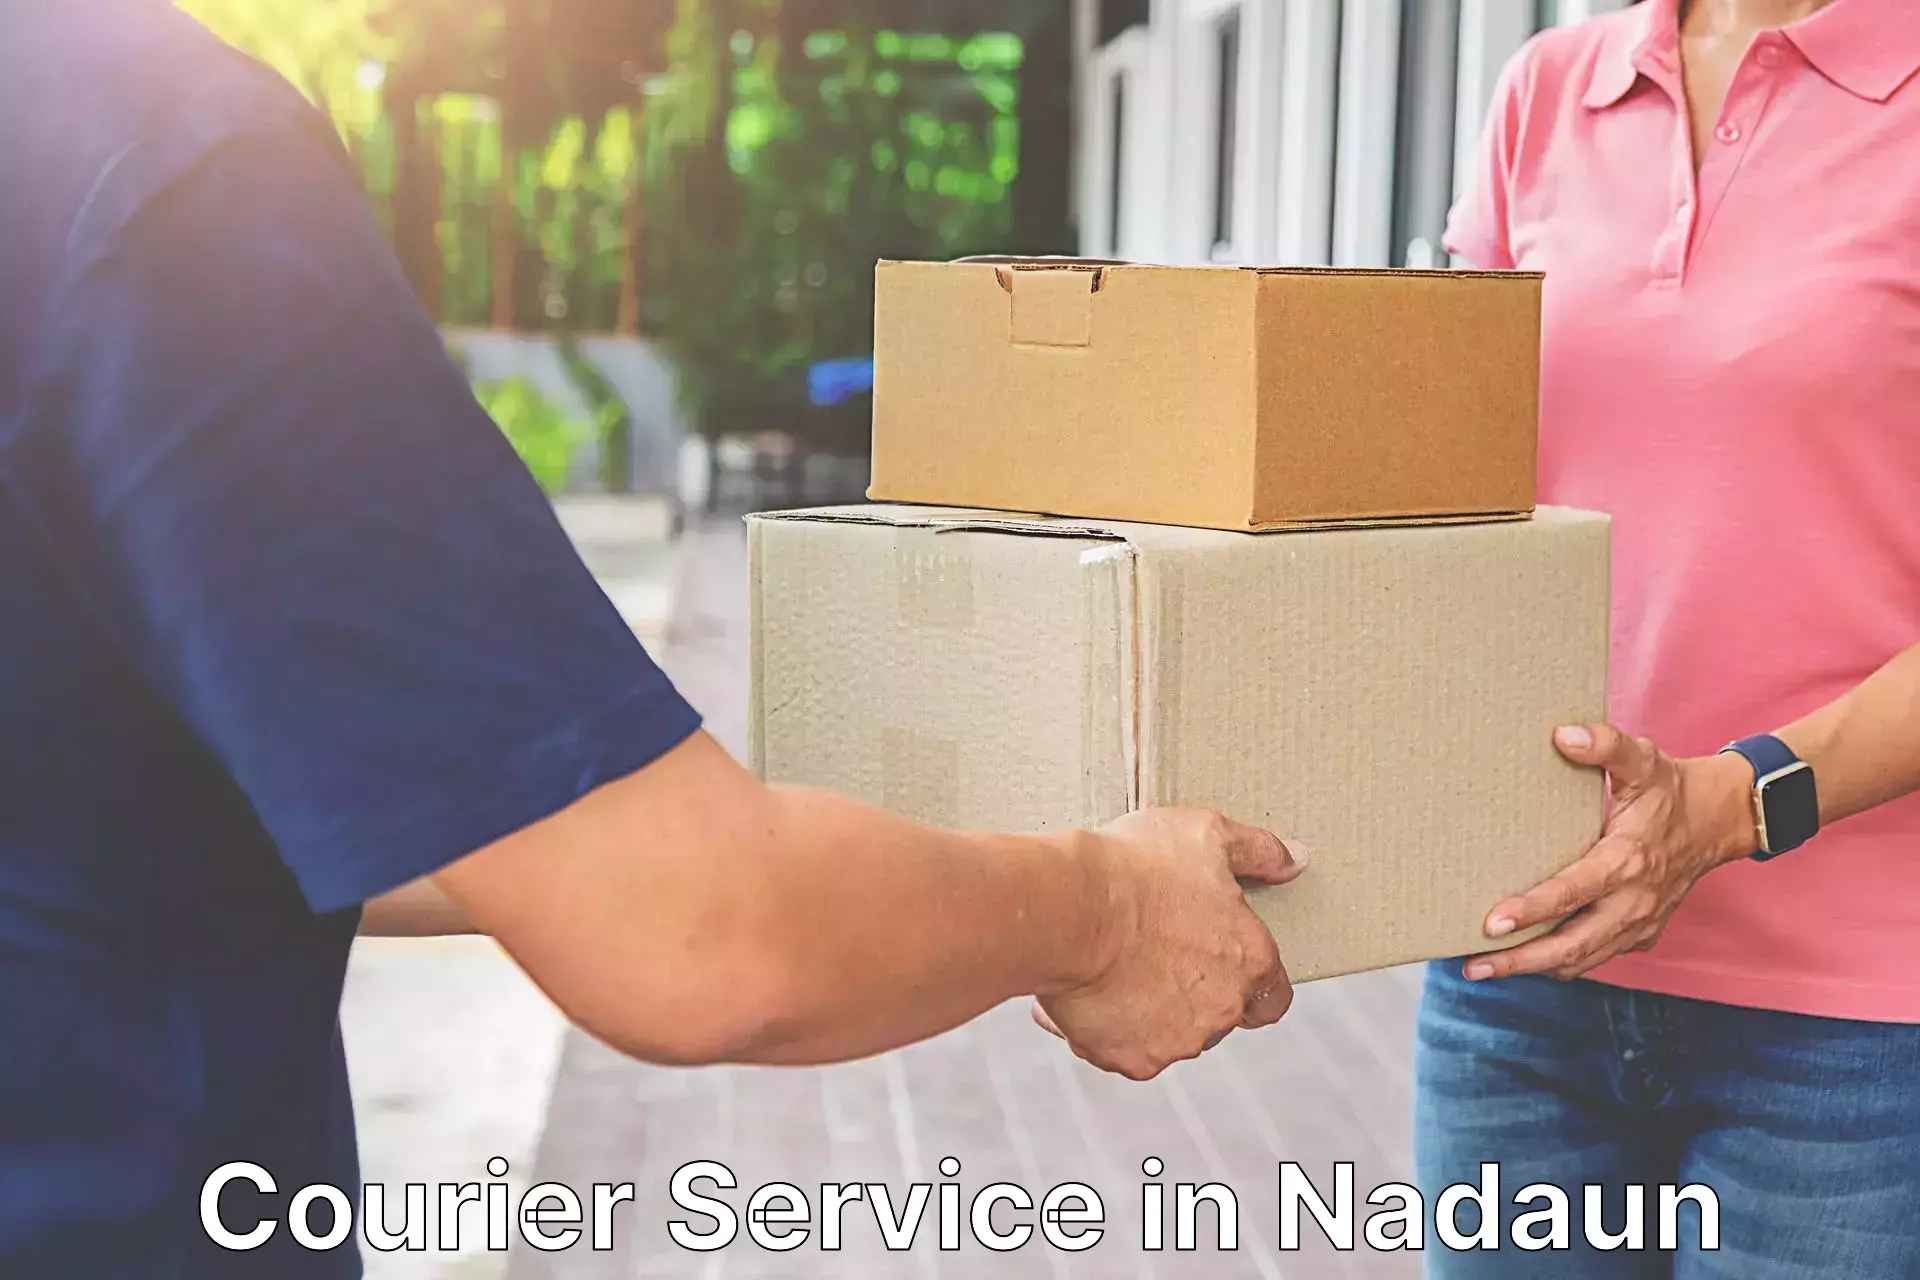 Express mail solutions in Nadaun